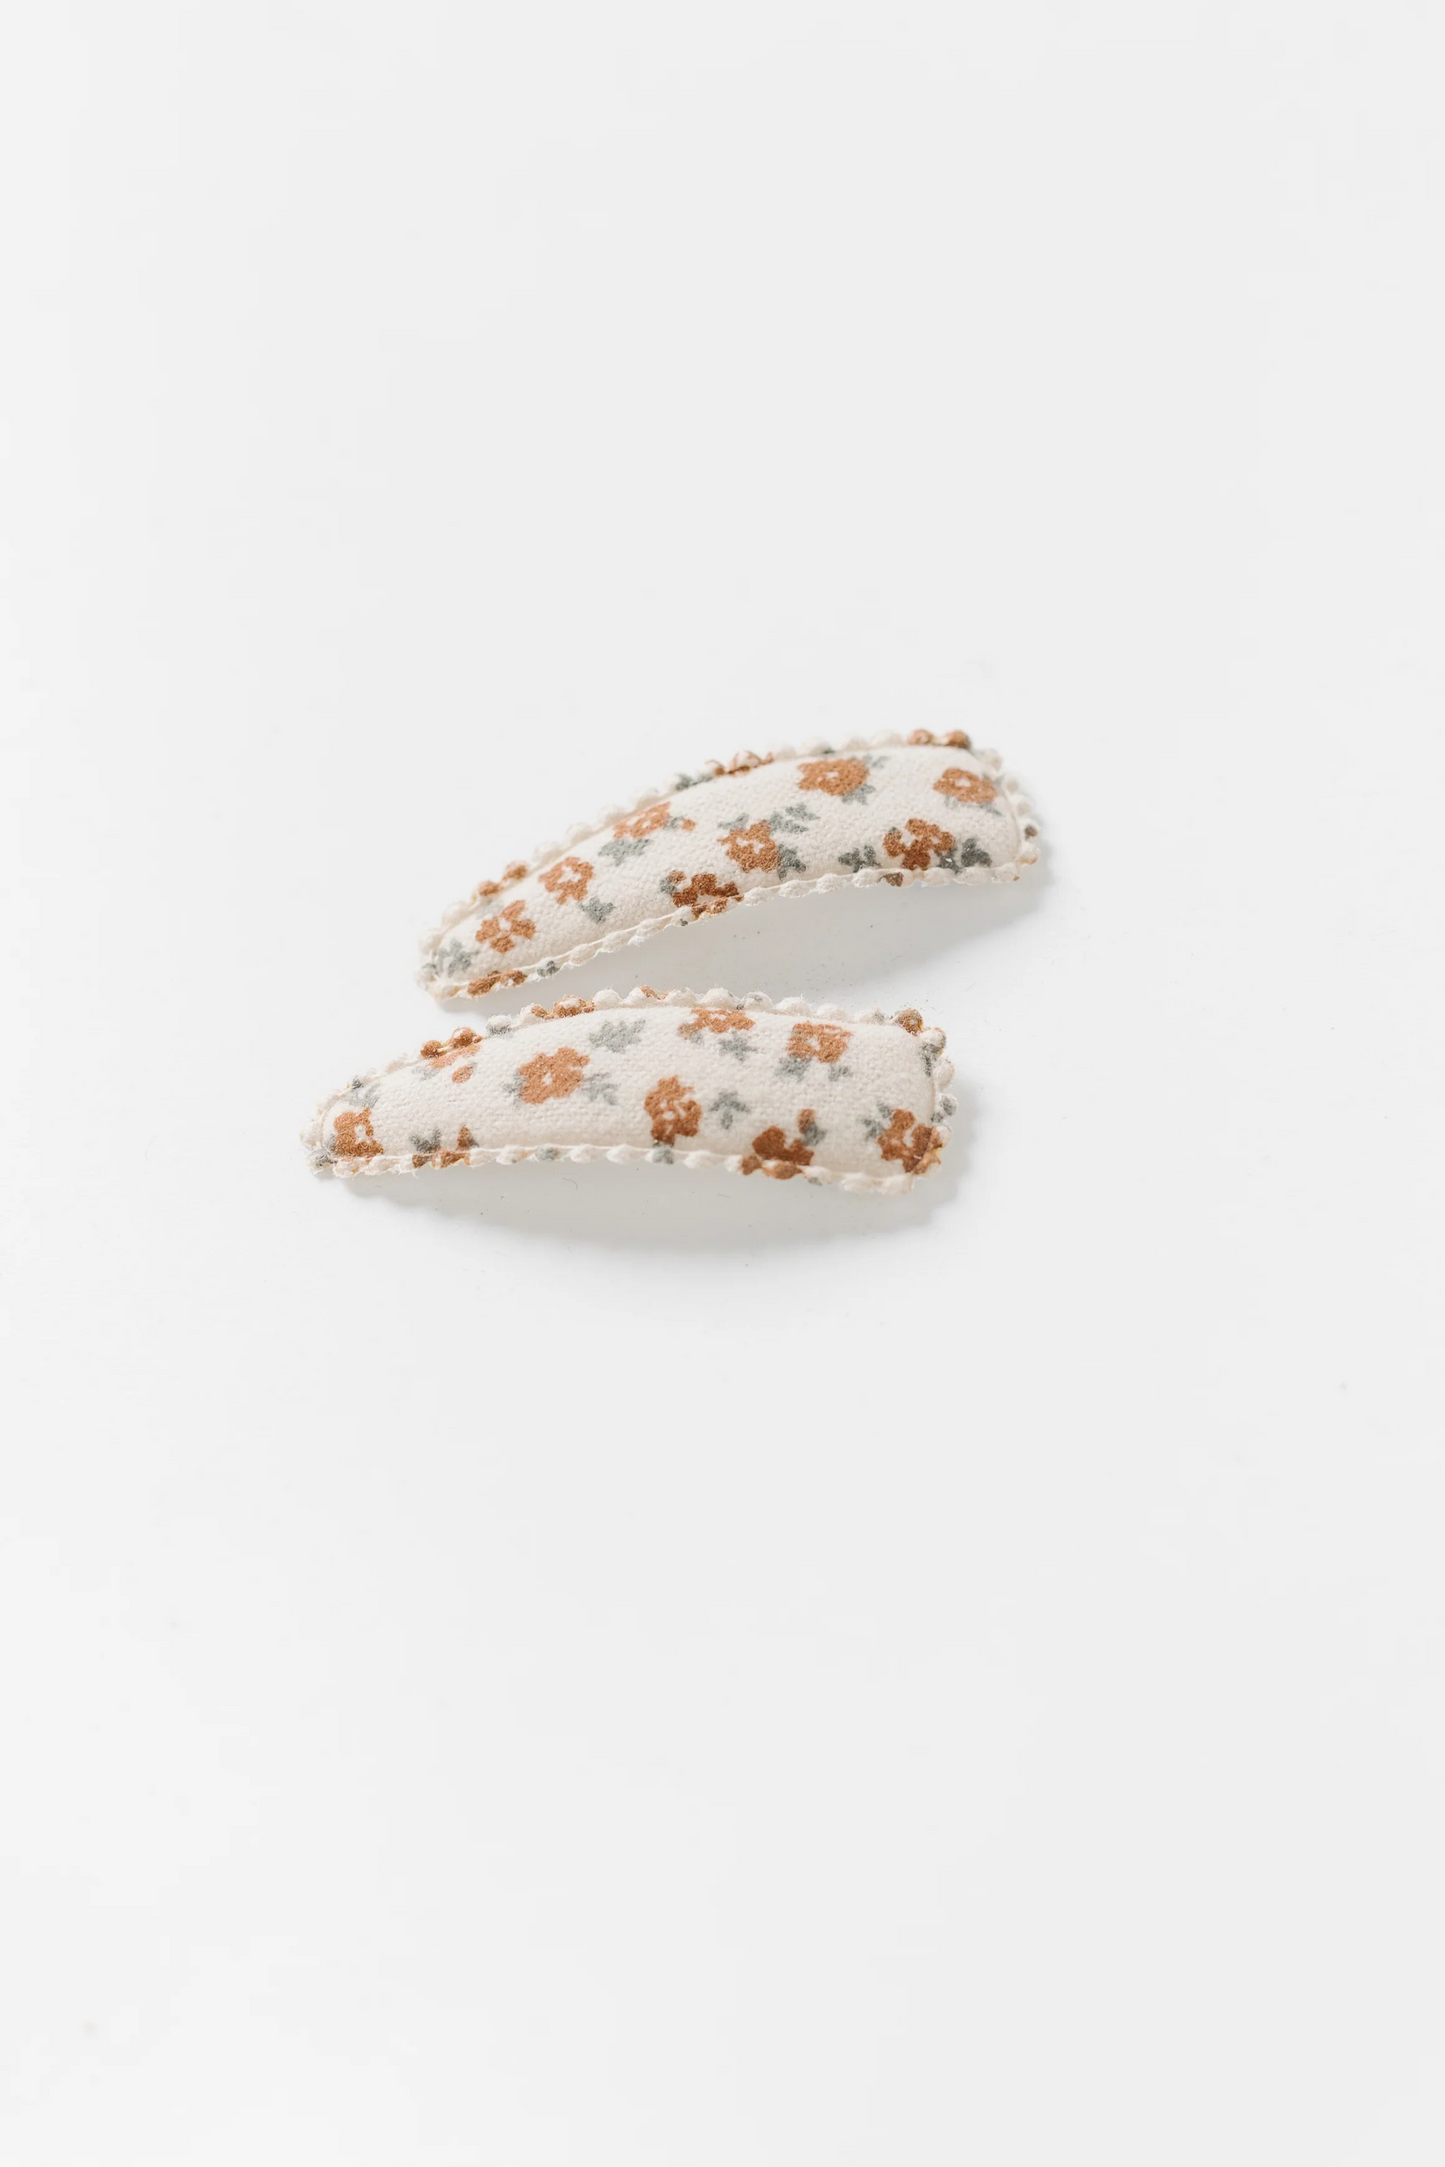 Cove Fabric Hair Clips - Set of 2